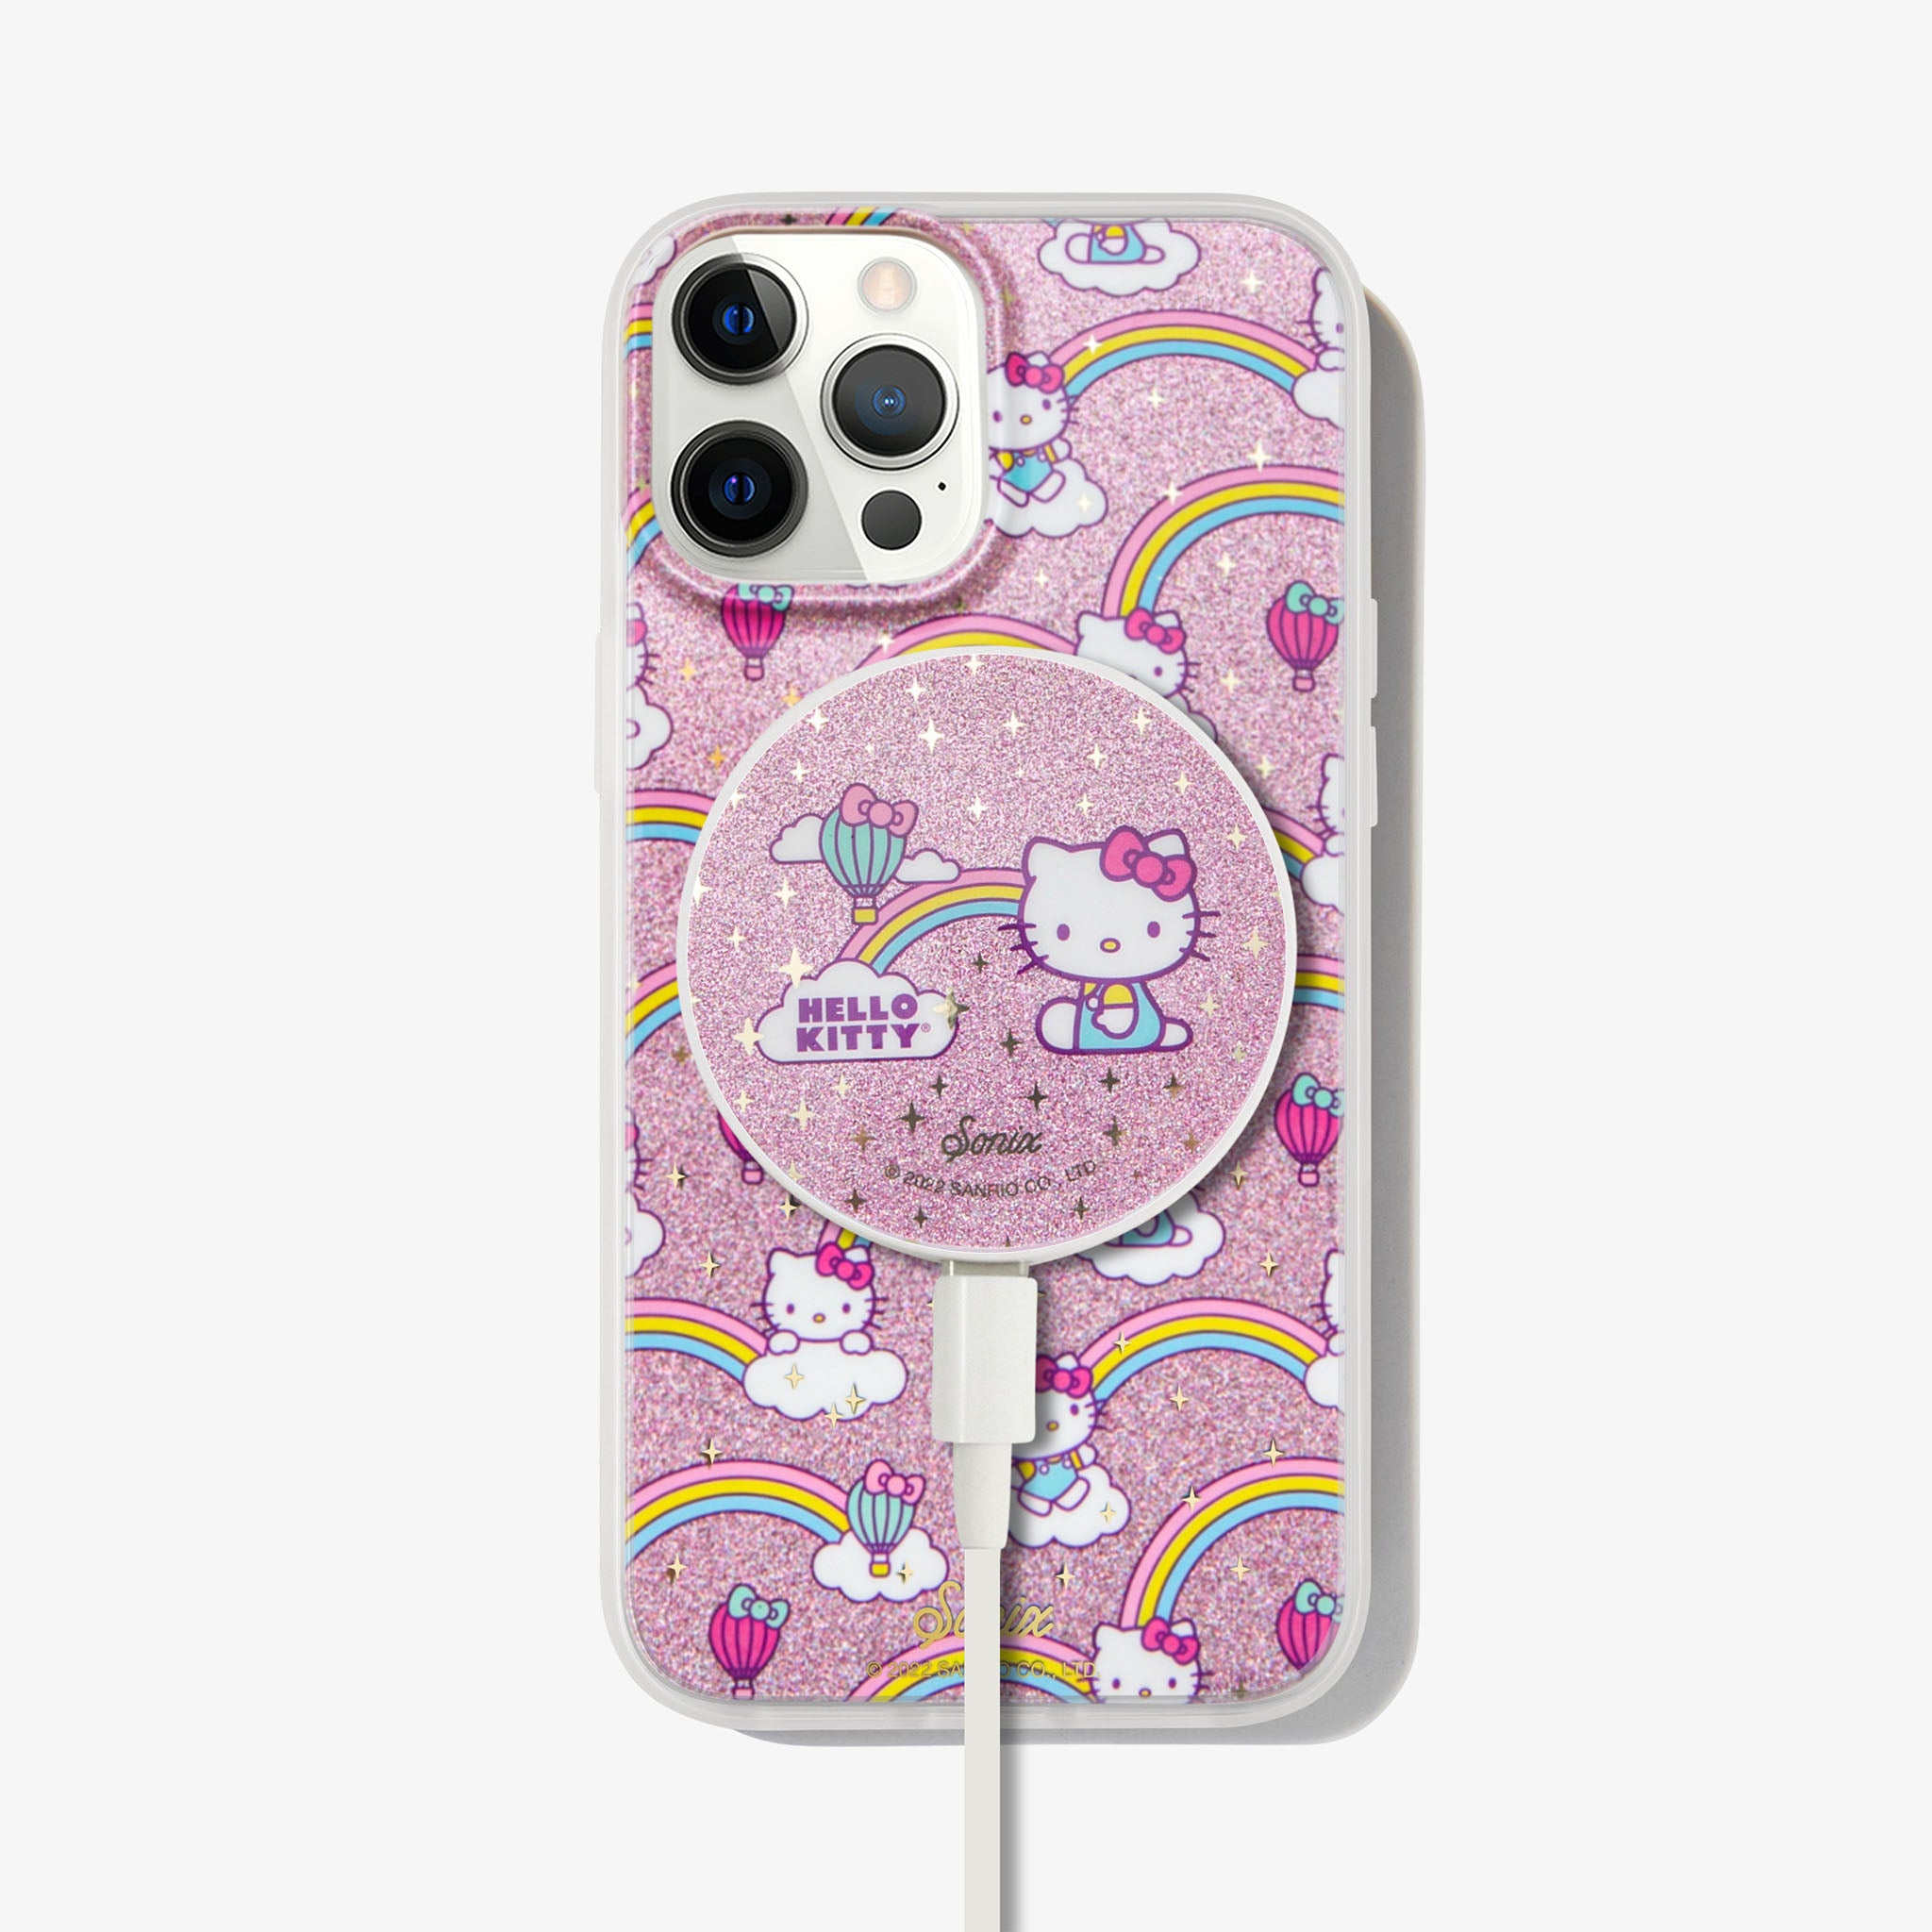 MagLink™ Magnetic Charger - Rainbow Hello Kitty®